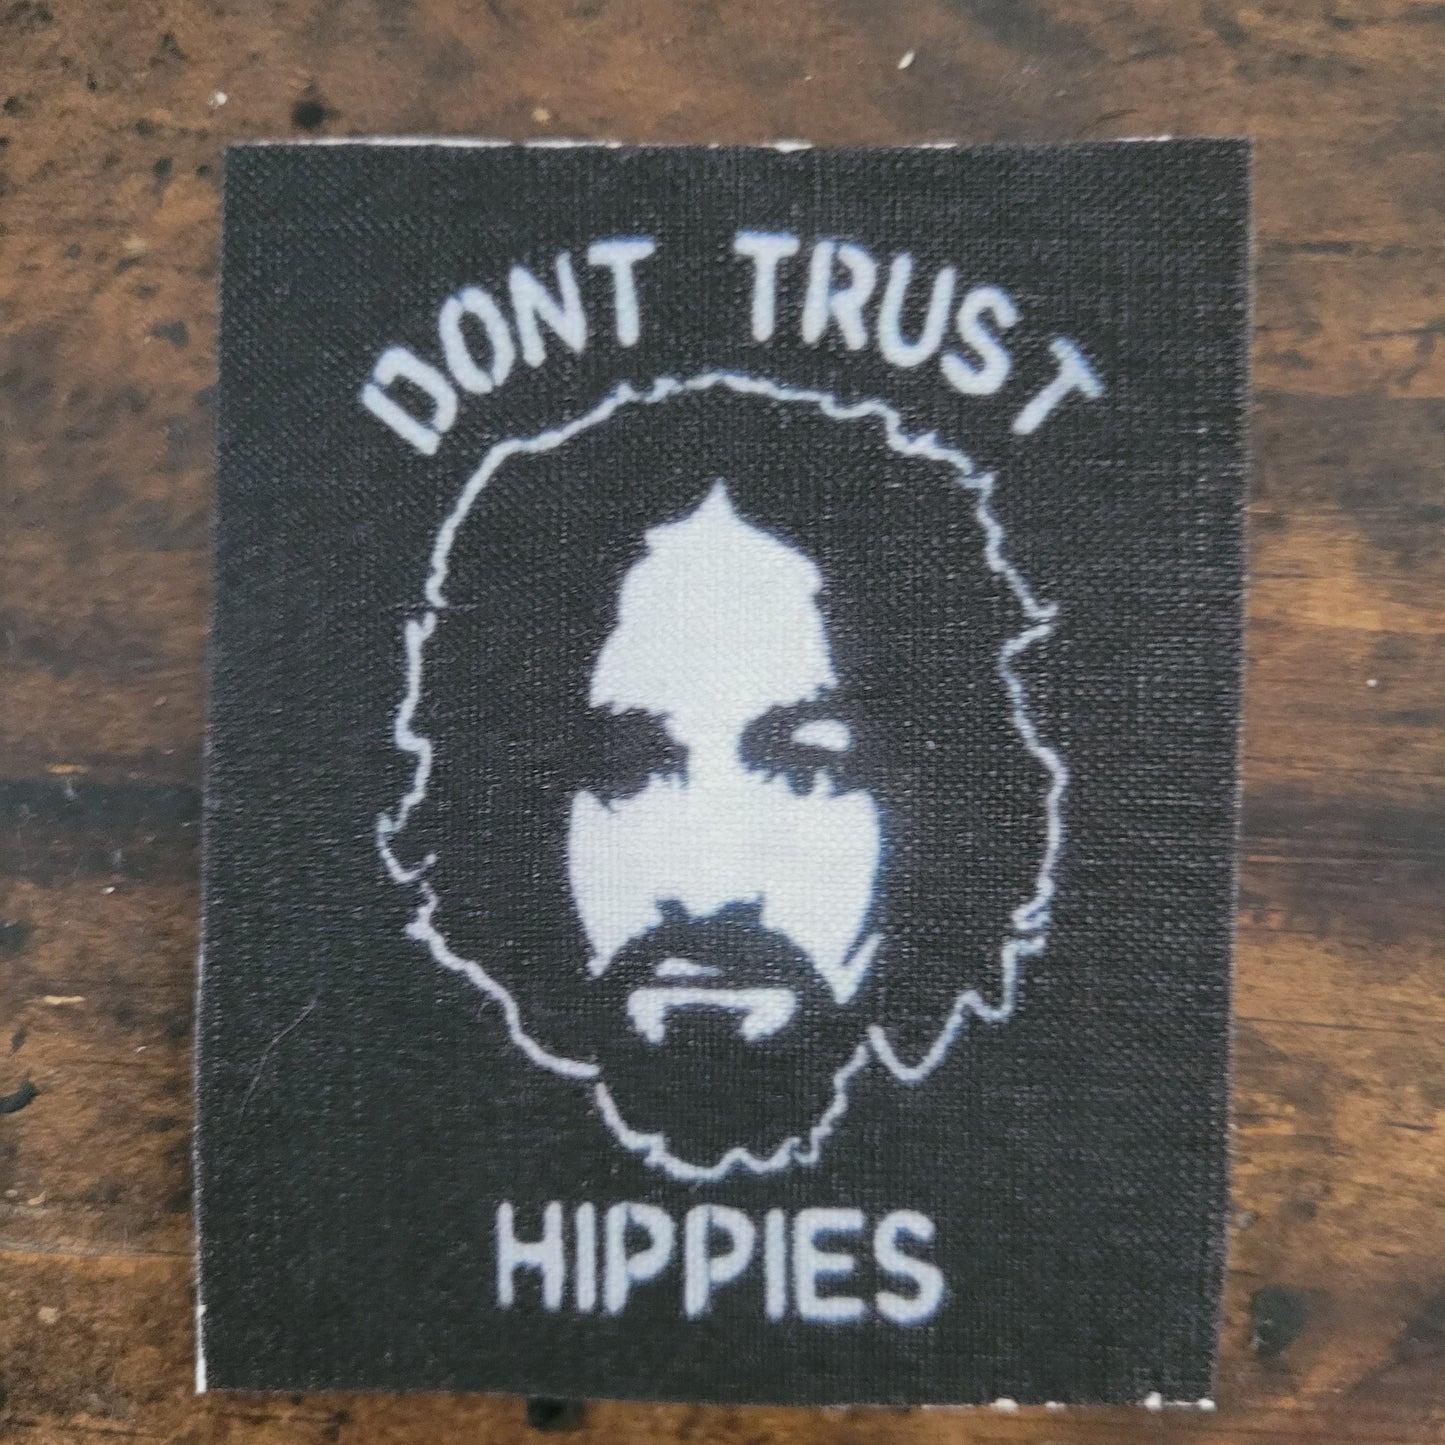 Backpatch "Don't Trust Hippies"